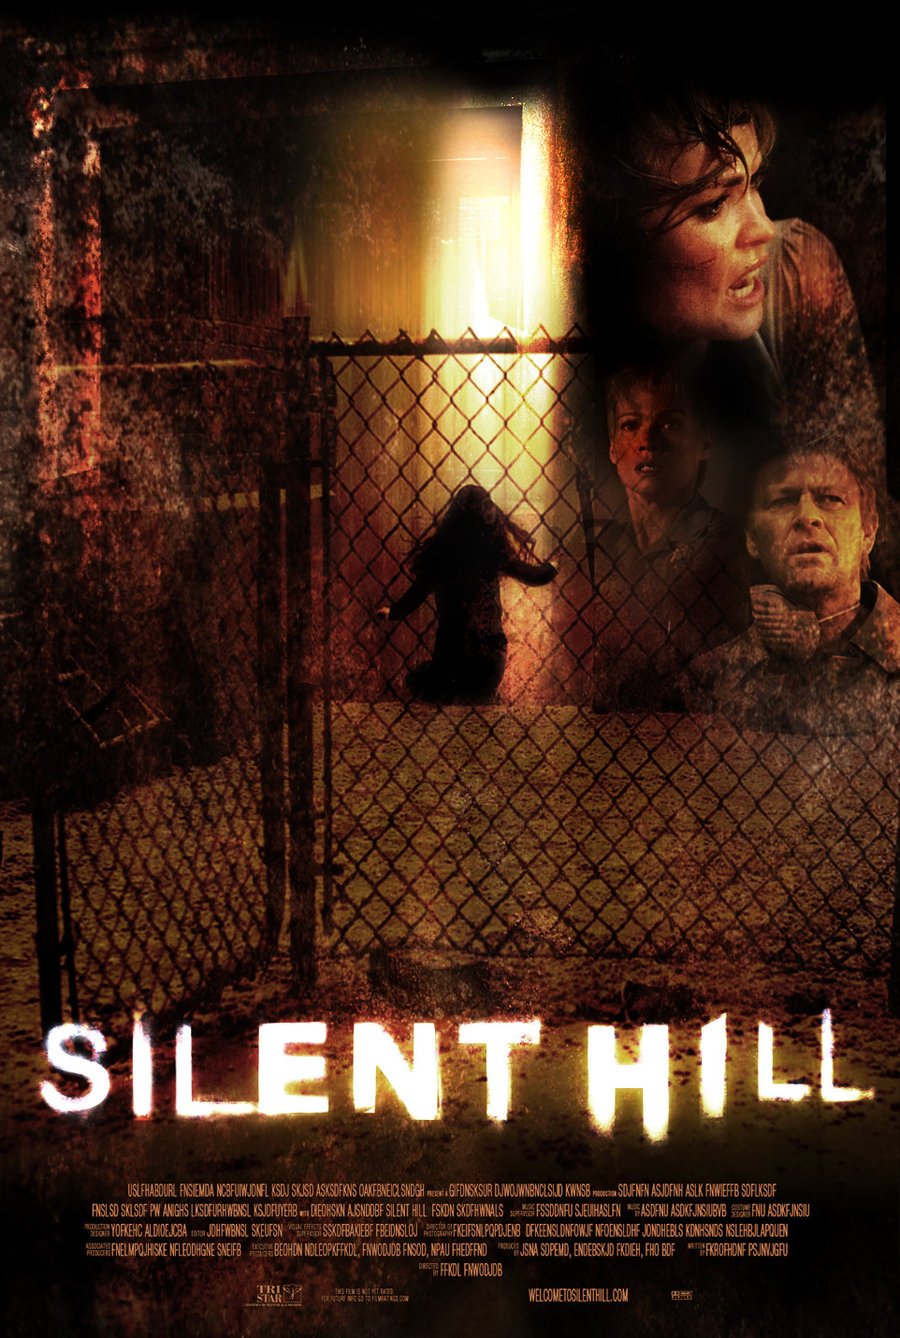 Poster of the movie Silent Hill